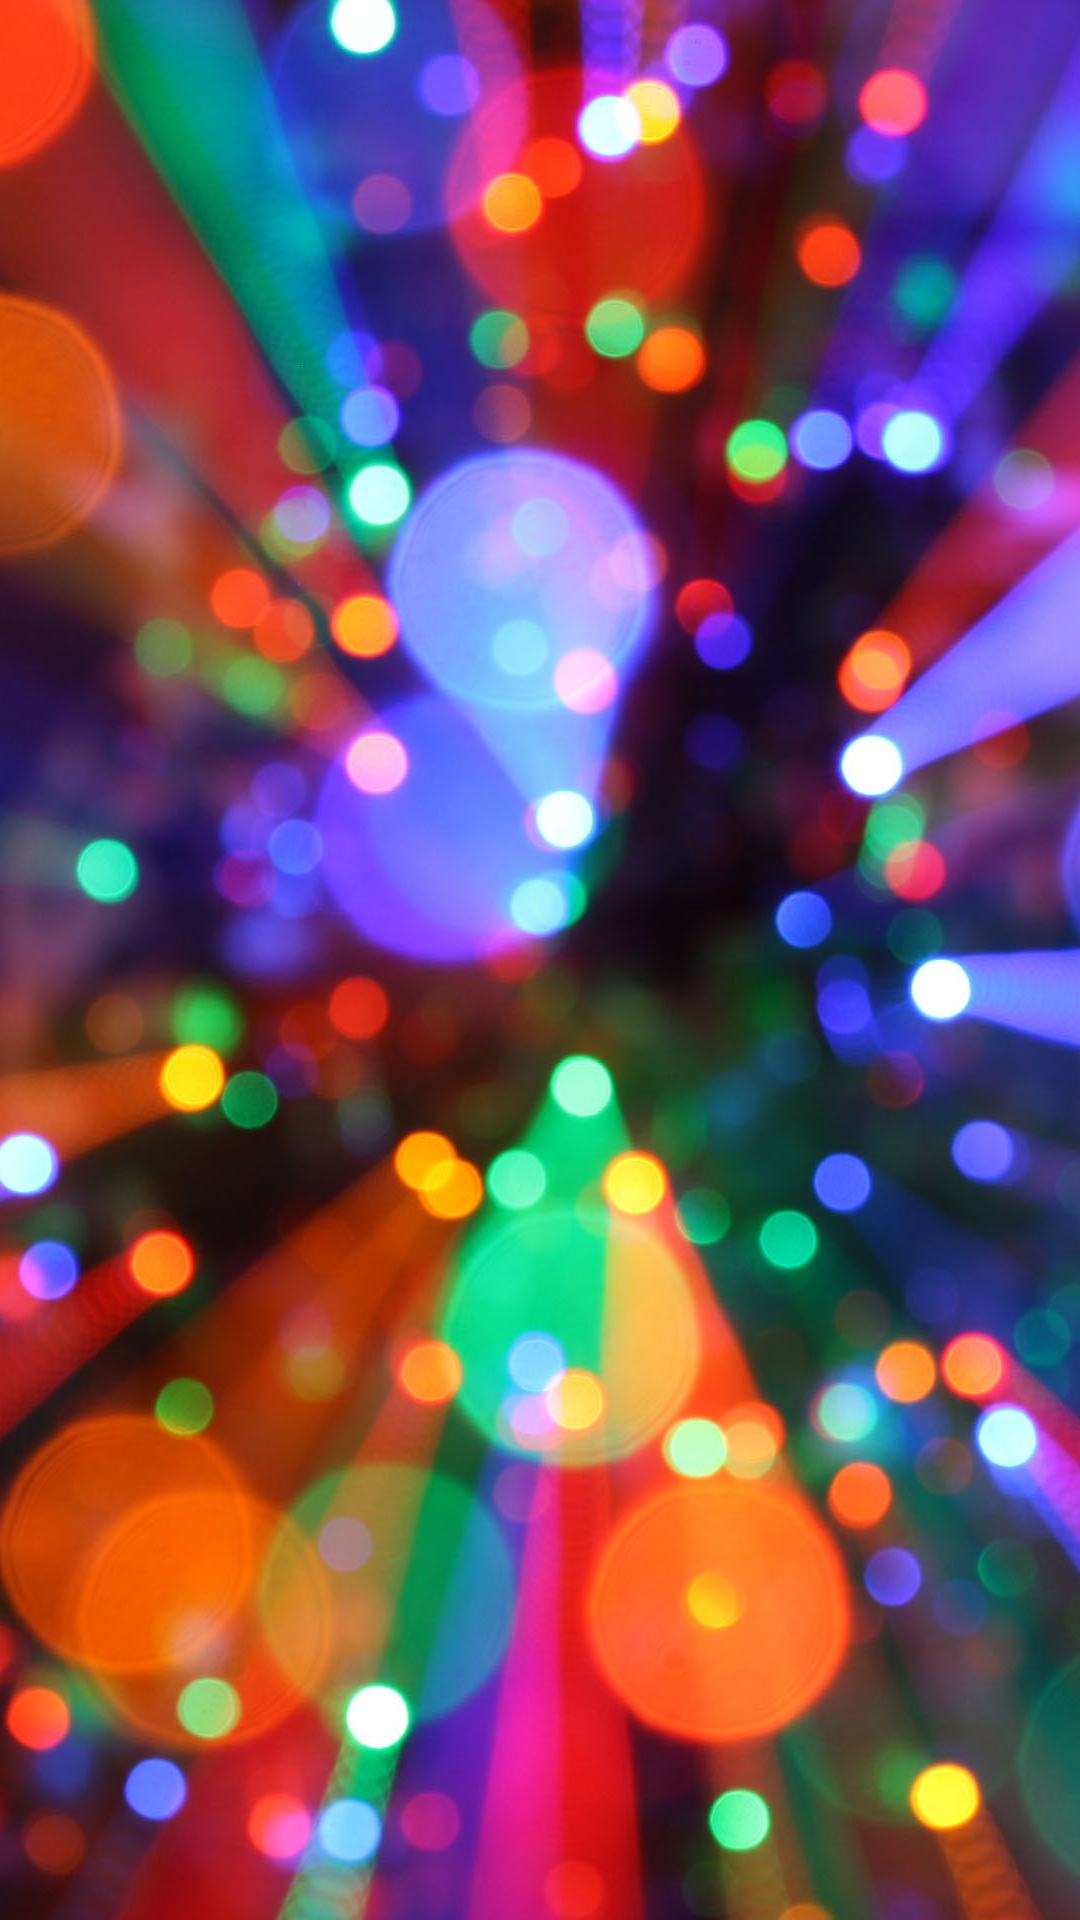 Christmas Lights Iphone Wallpapers Free Download - Christmas Lights Phone Background - HD Wallpaper 